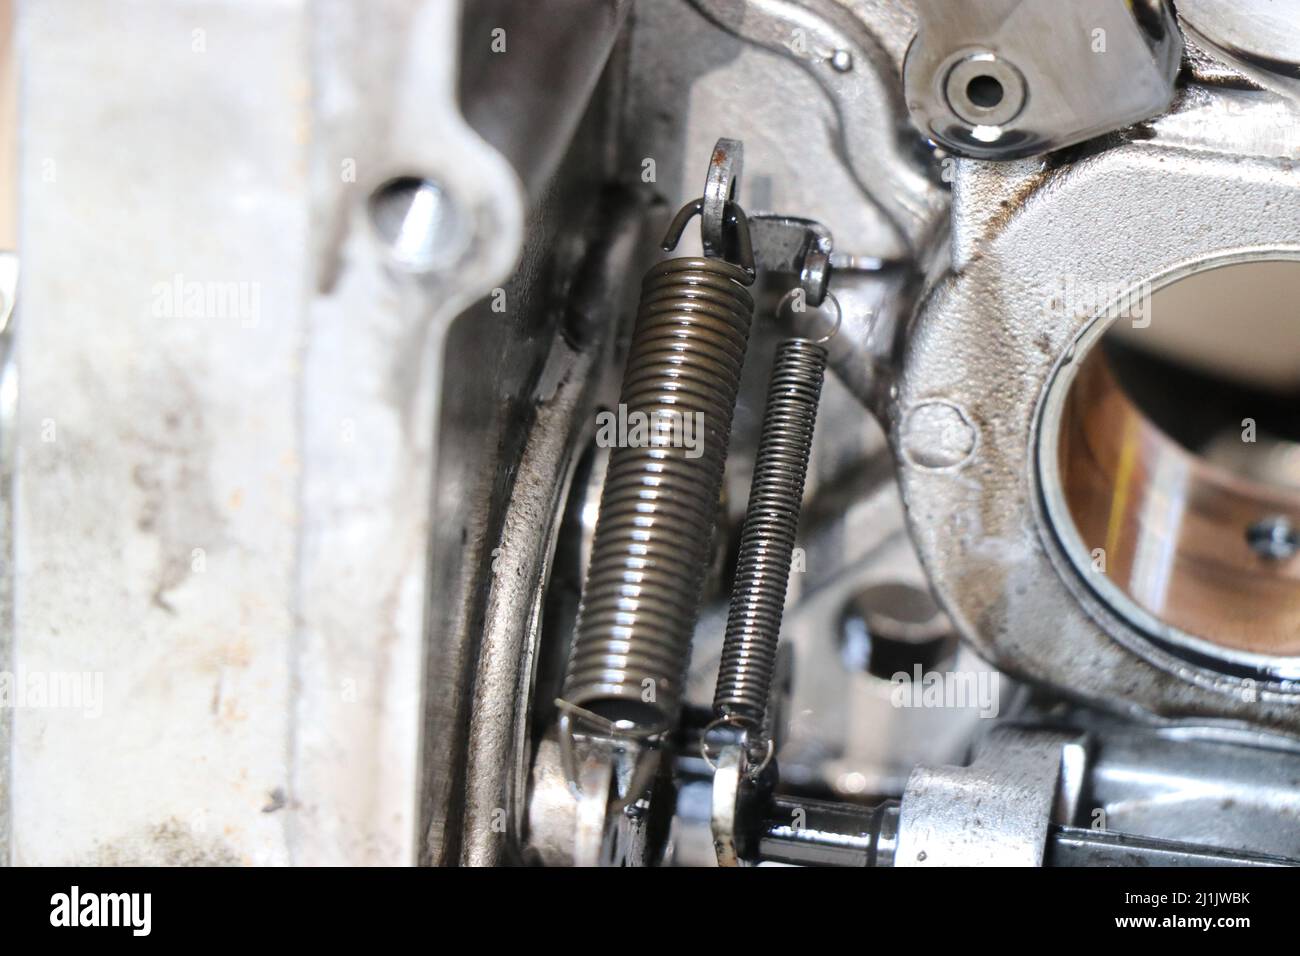 Focus on springs of an internal combustion engine that is disassembled for some repair works Stock Photo